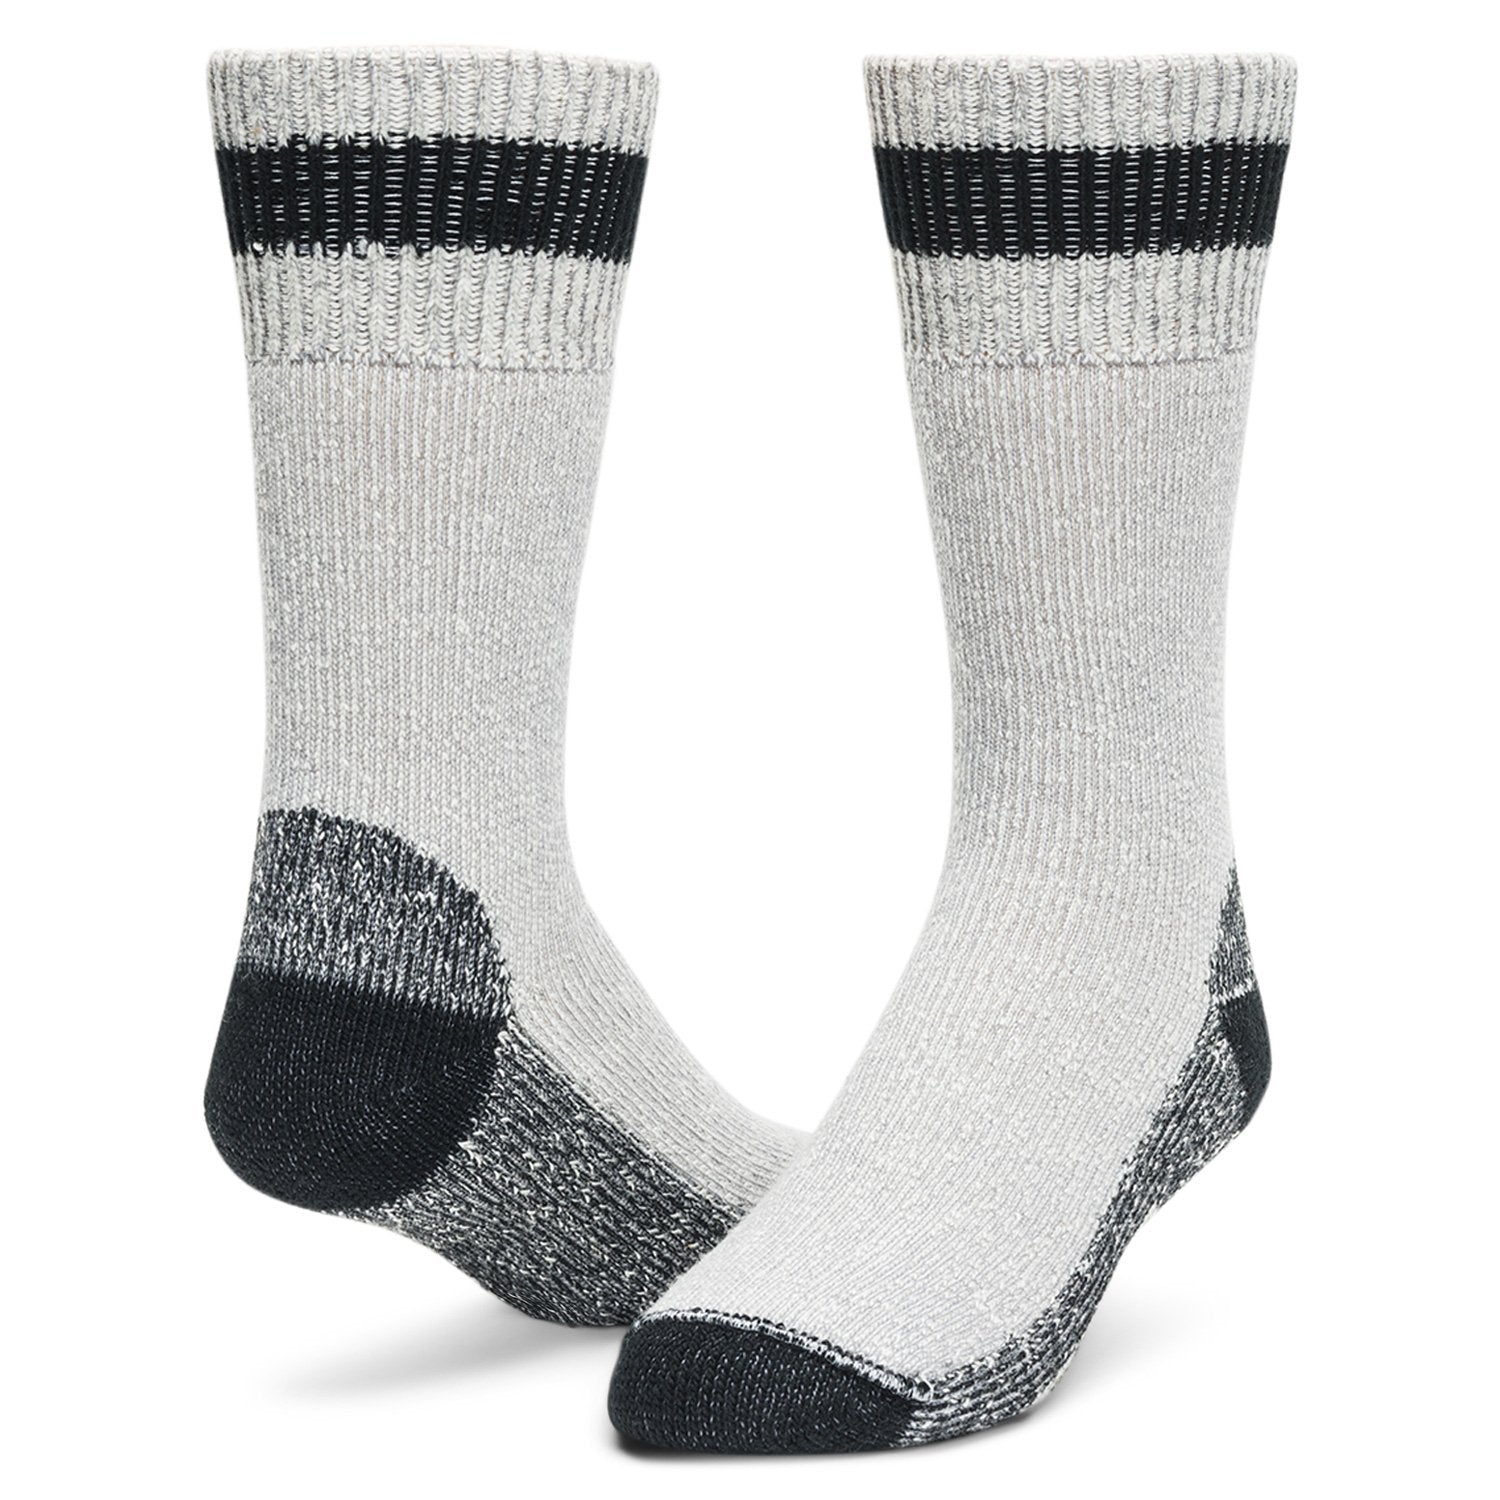 Diabetic Thermal Crew Heavyweight Sock With Wool - Grey/Black full product perspective - made in The USA Wigwam Socks